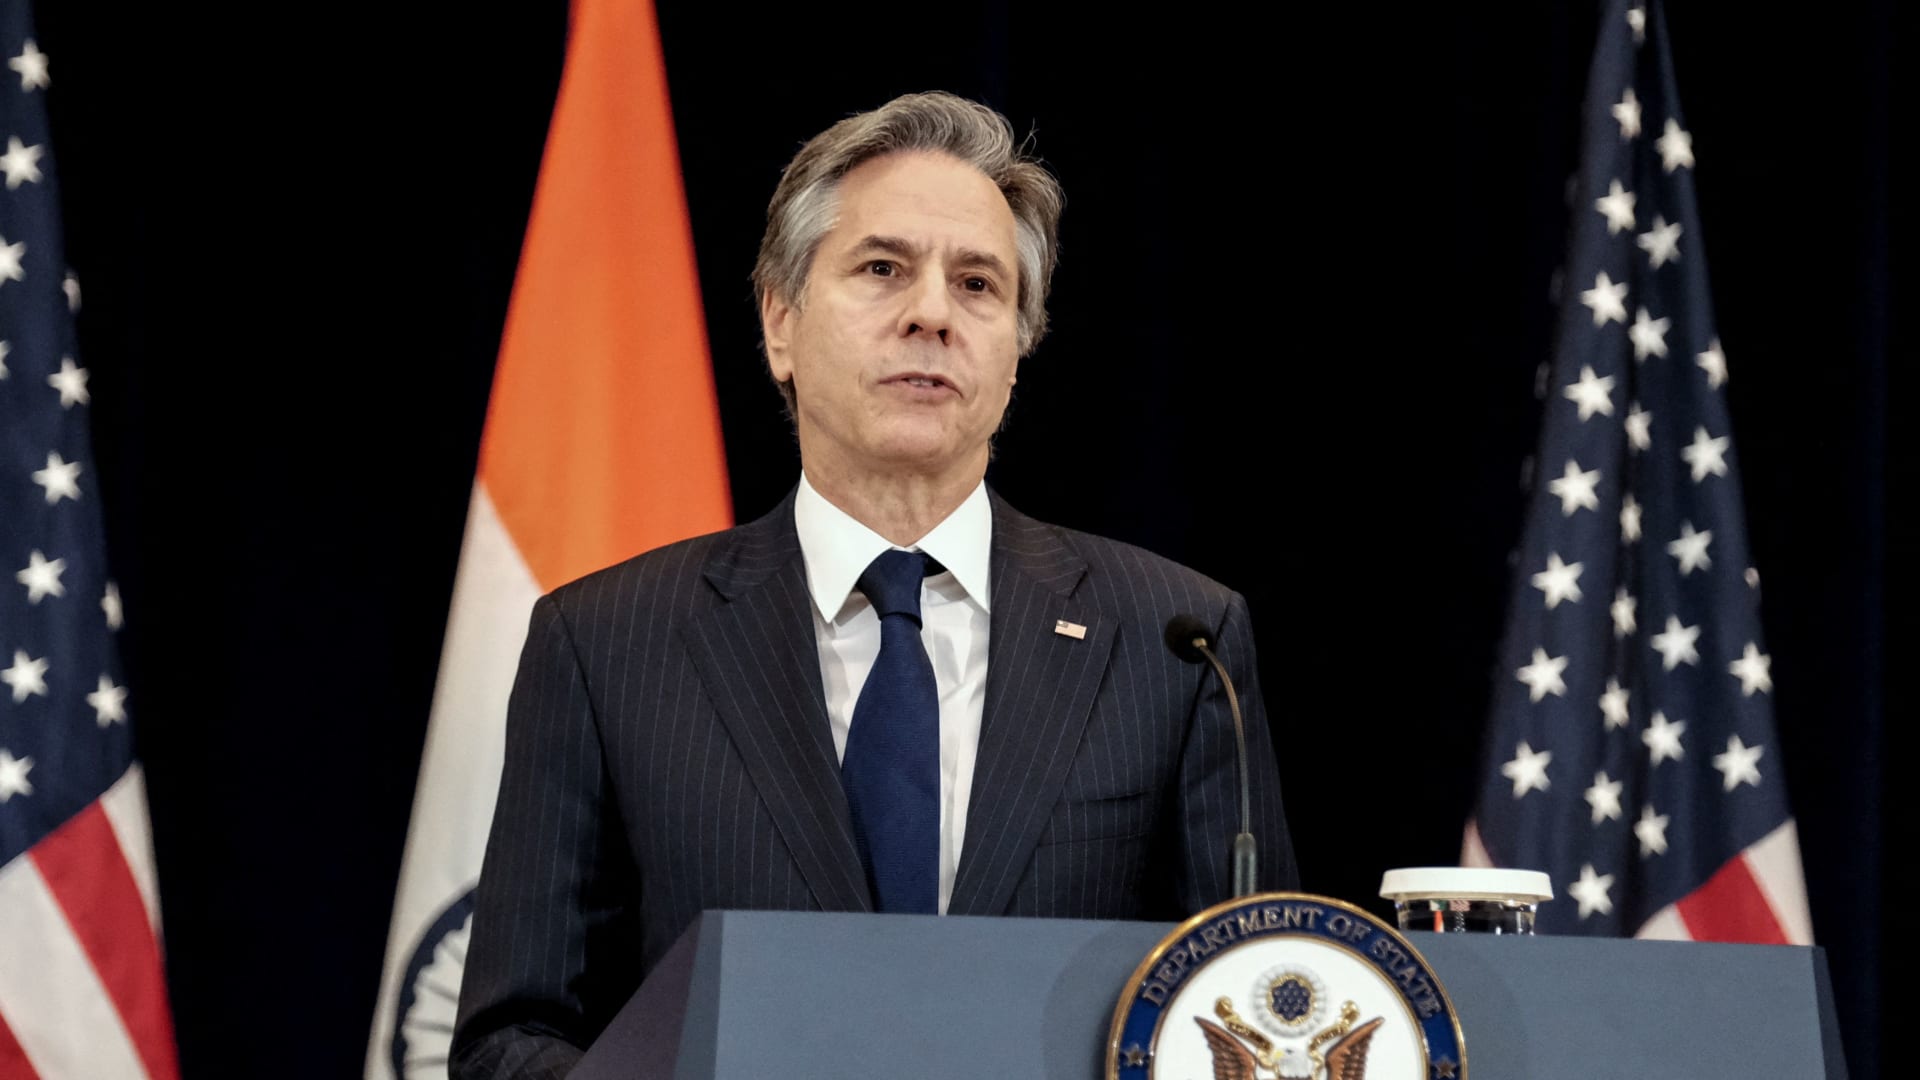 U.S. Secretary of State Antony Blinken holds a joint news conference during the fourth U.S.-India 2+2 Ministerial Dialogue at the State Department in Washington, U.S., April 11, 2022. 